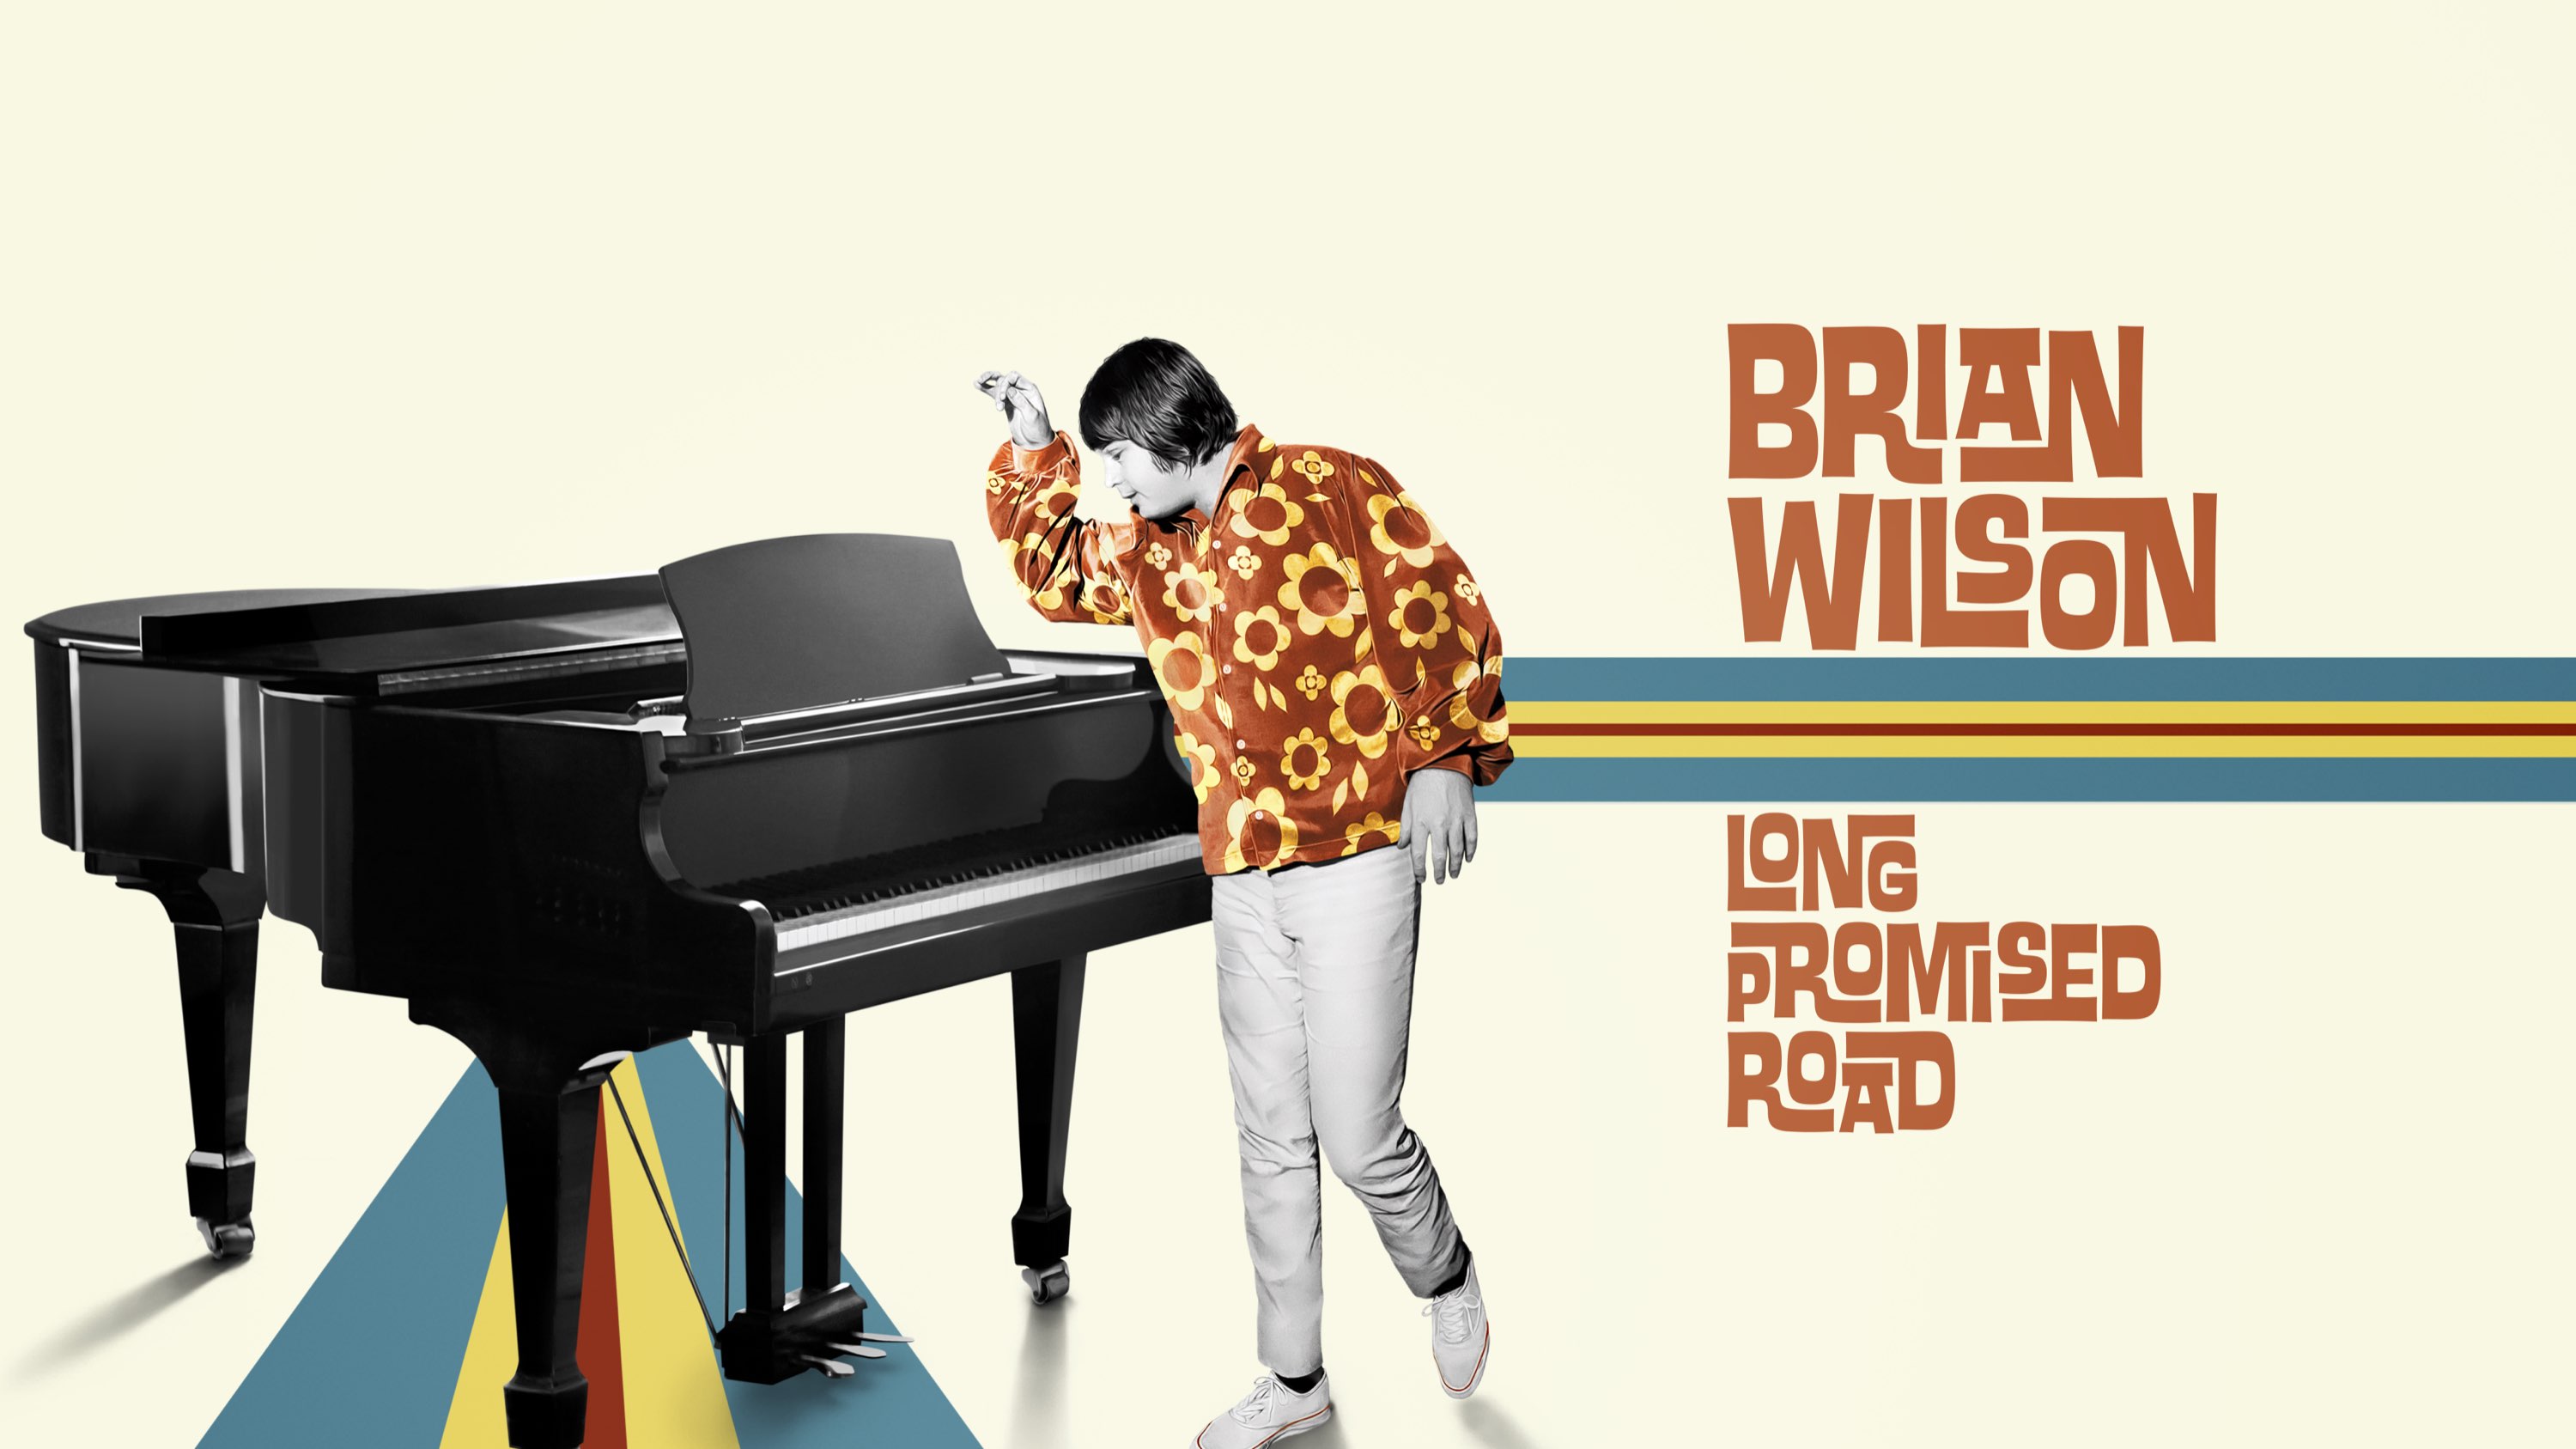 Brian Wilson: Long Promised Road available 21 January